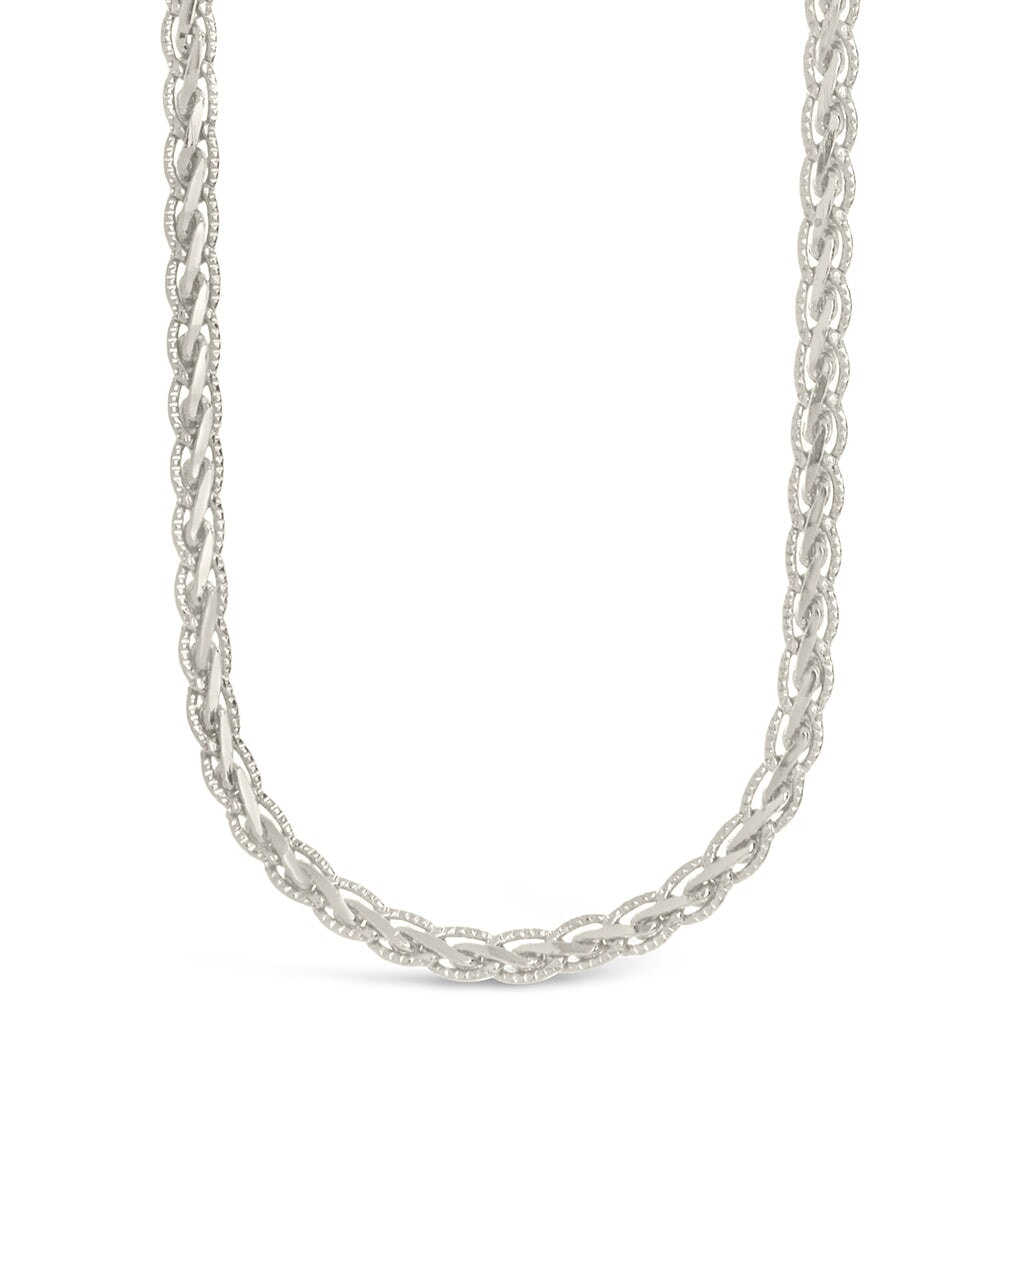 Larissa Chain Necklace Necklace Sterling Forever Silver 